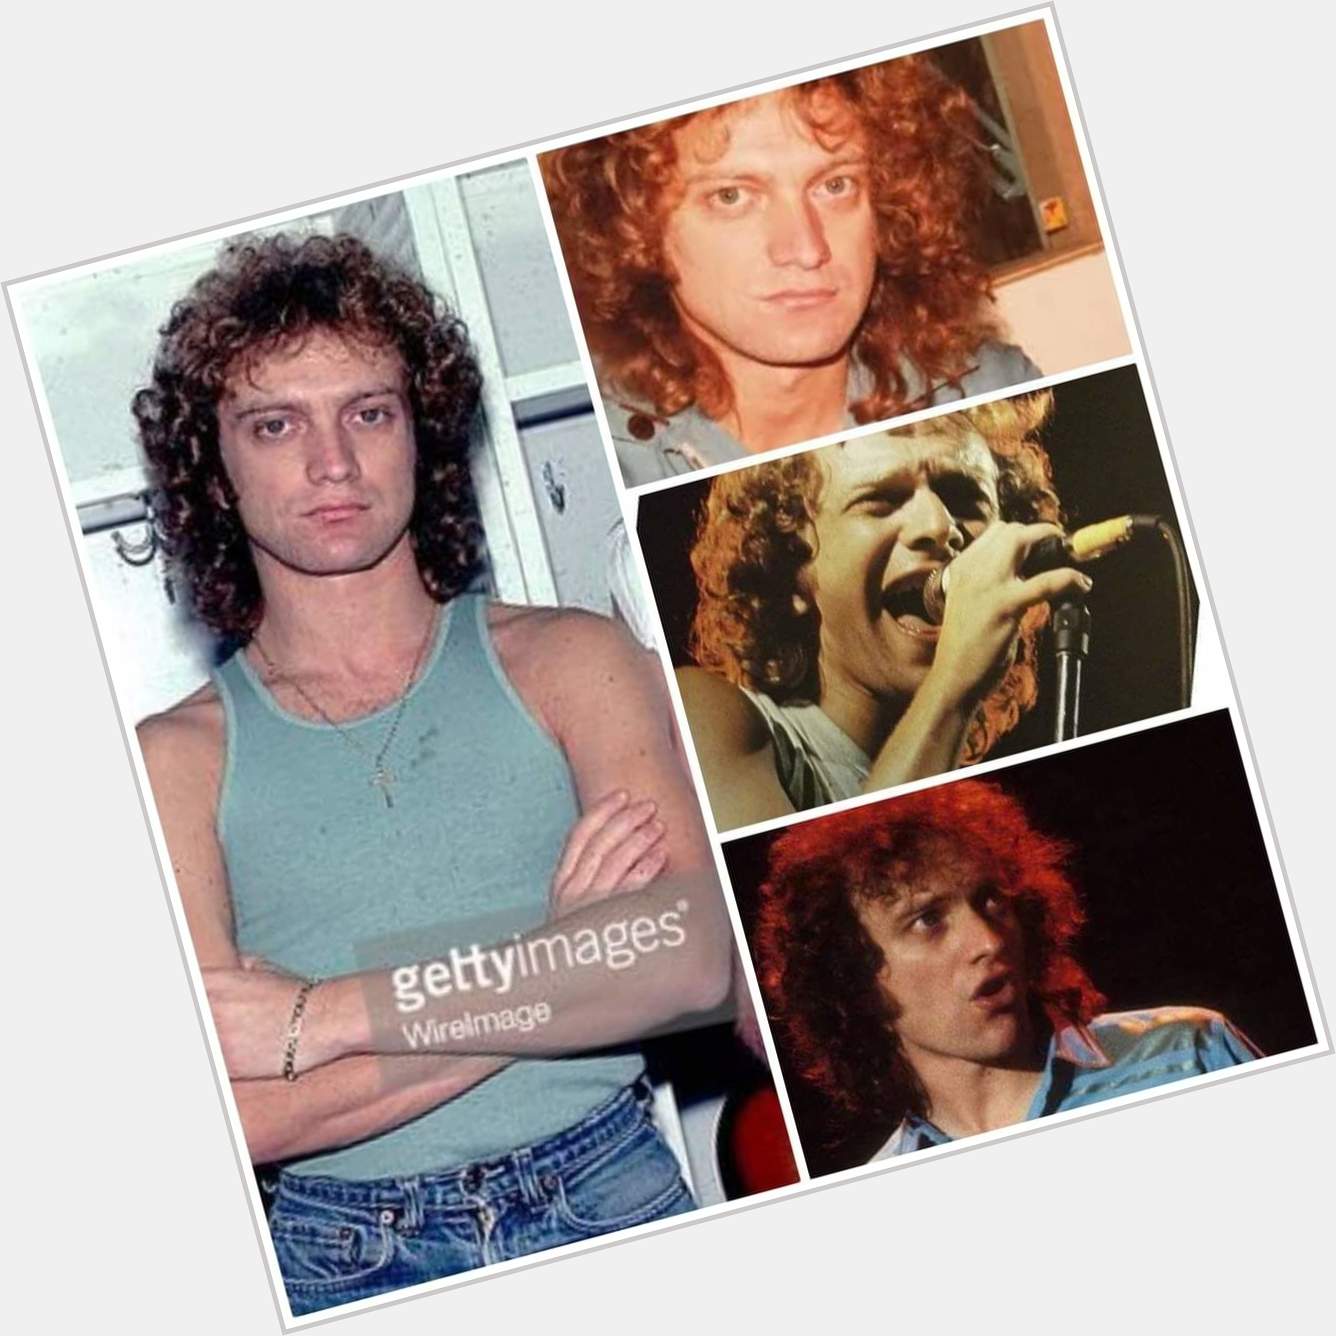 Happy Birthday Lou Gramm.  Ex Frontman and Singer from the Band Foreigner. 